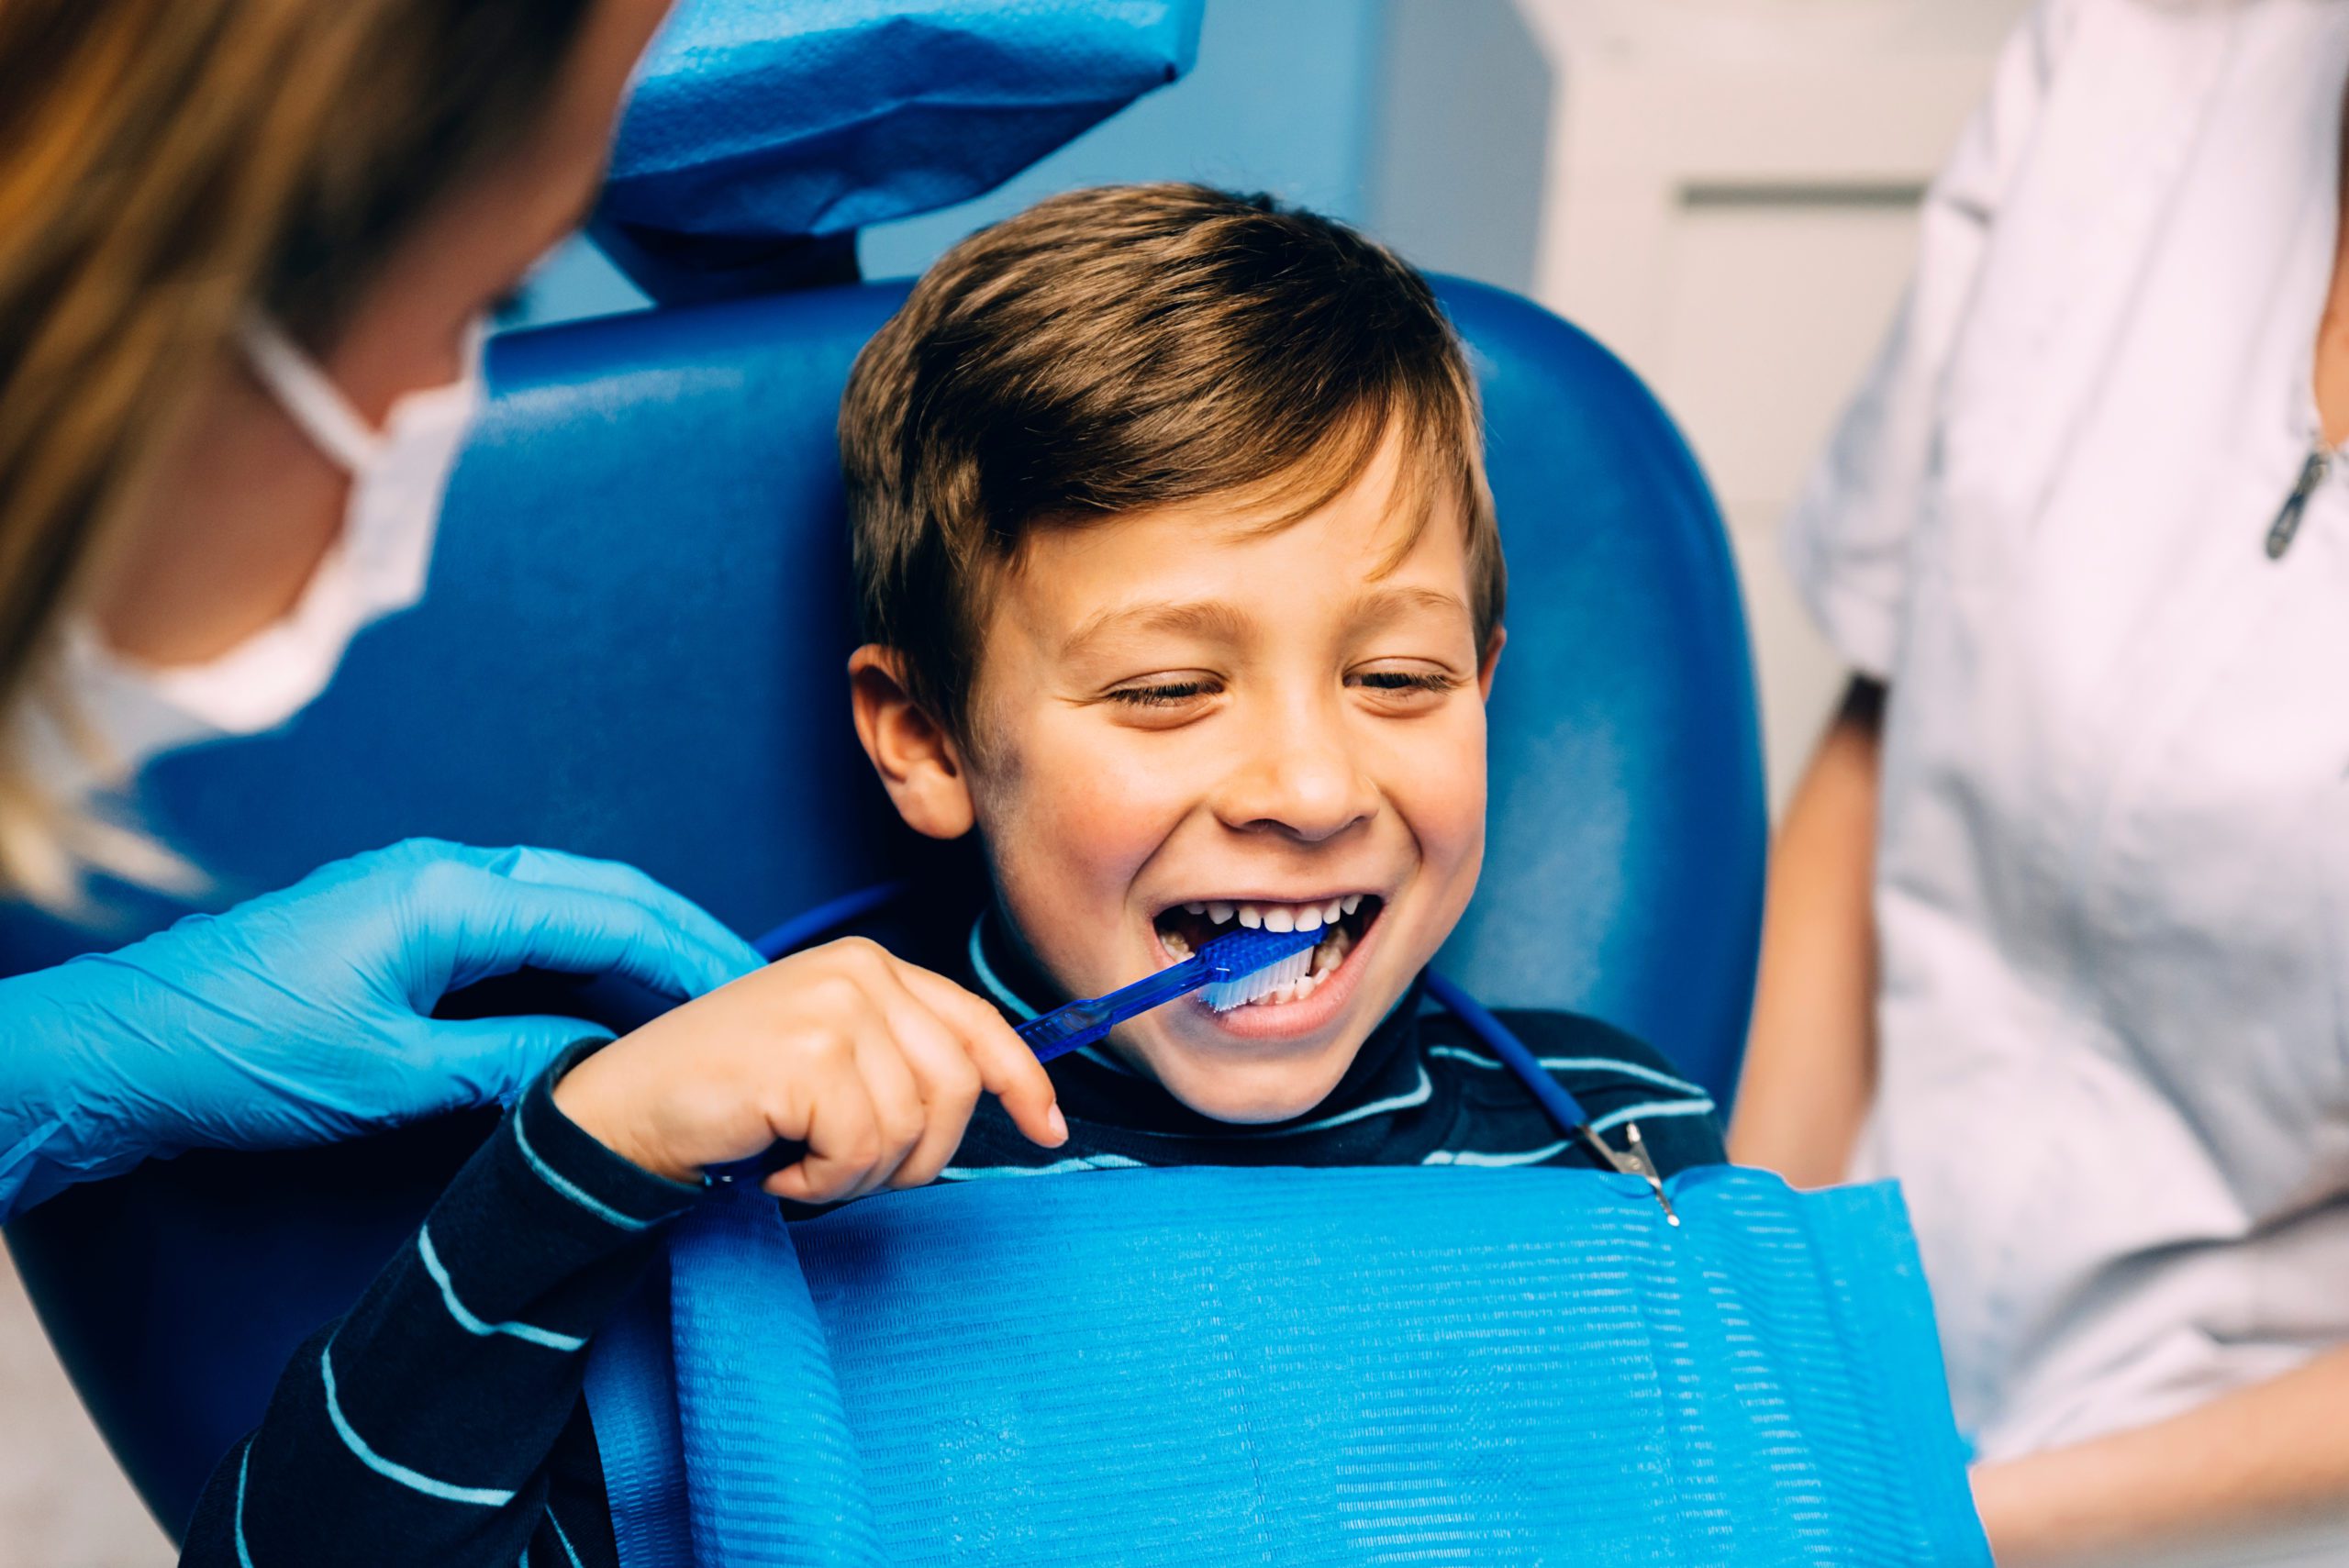 Young boy brushing his teeth at the dentist